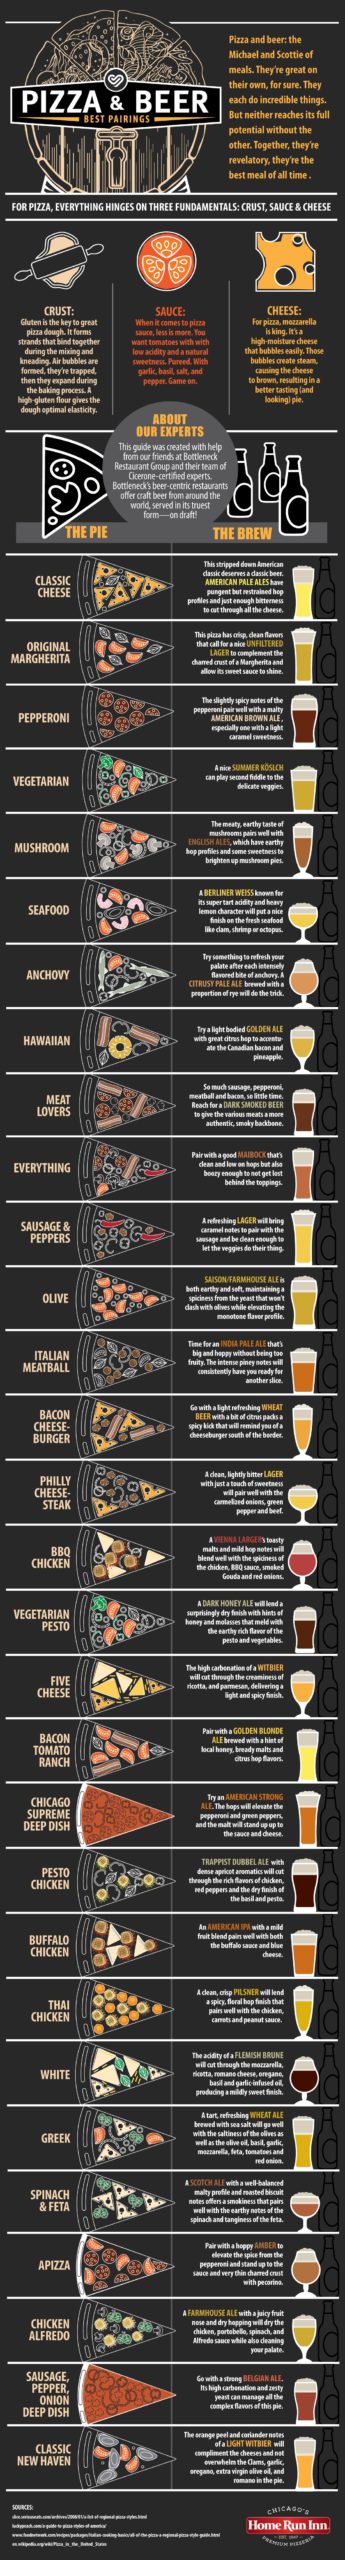 Find The Perfect Beer Pairing For Your Pizza With This Visual Guide [Infographic]